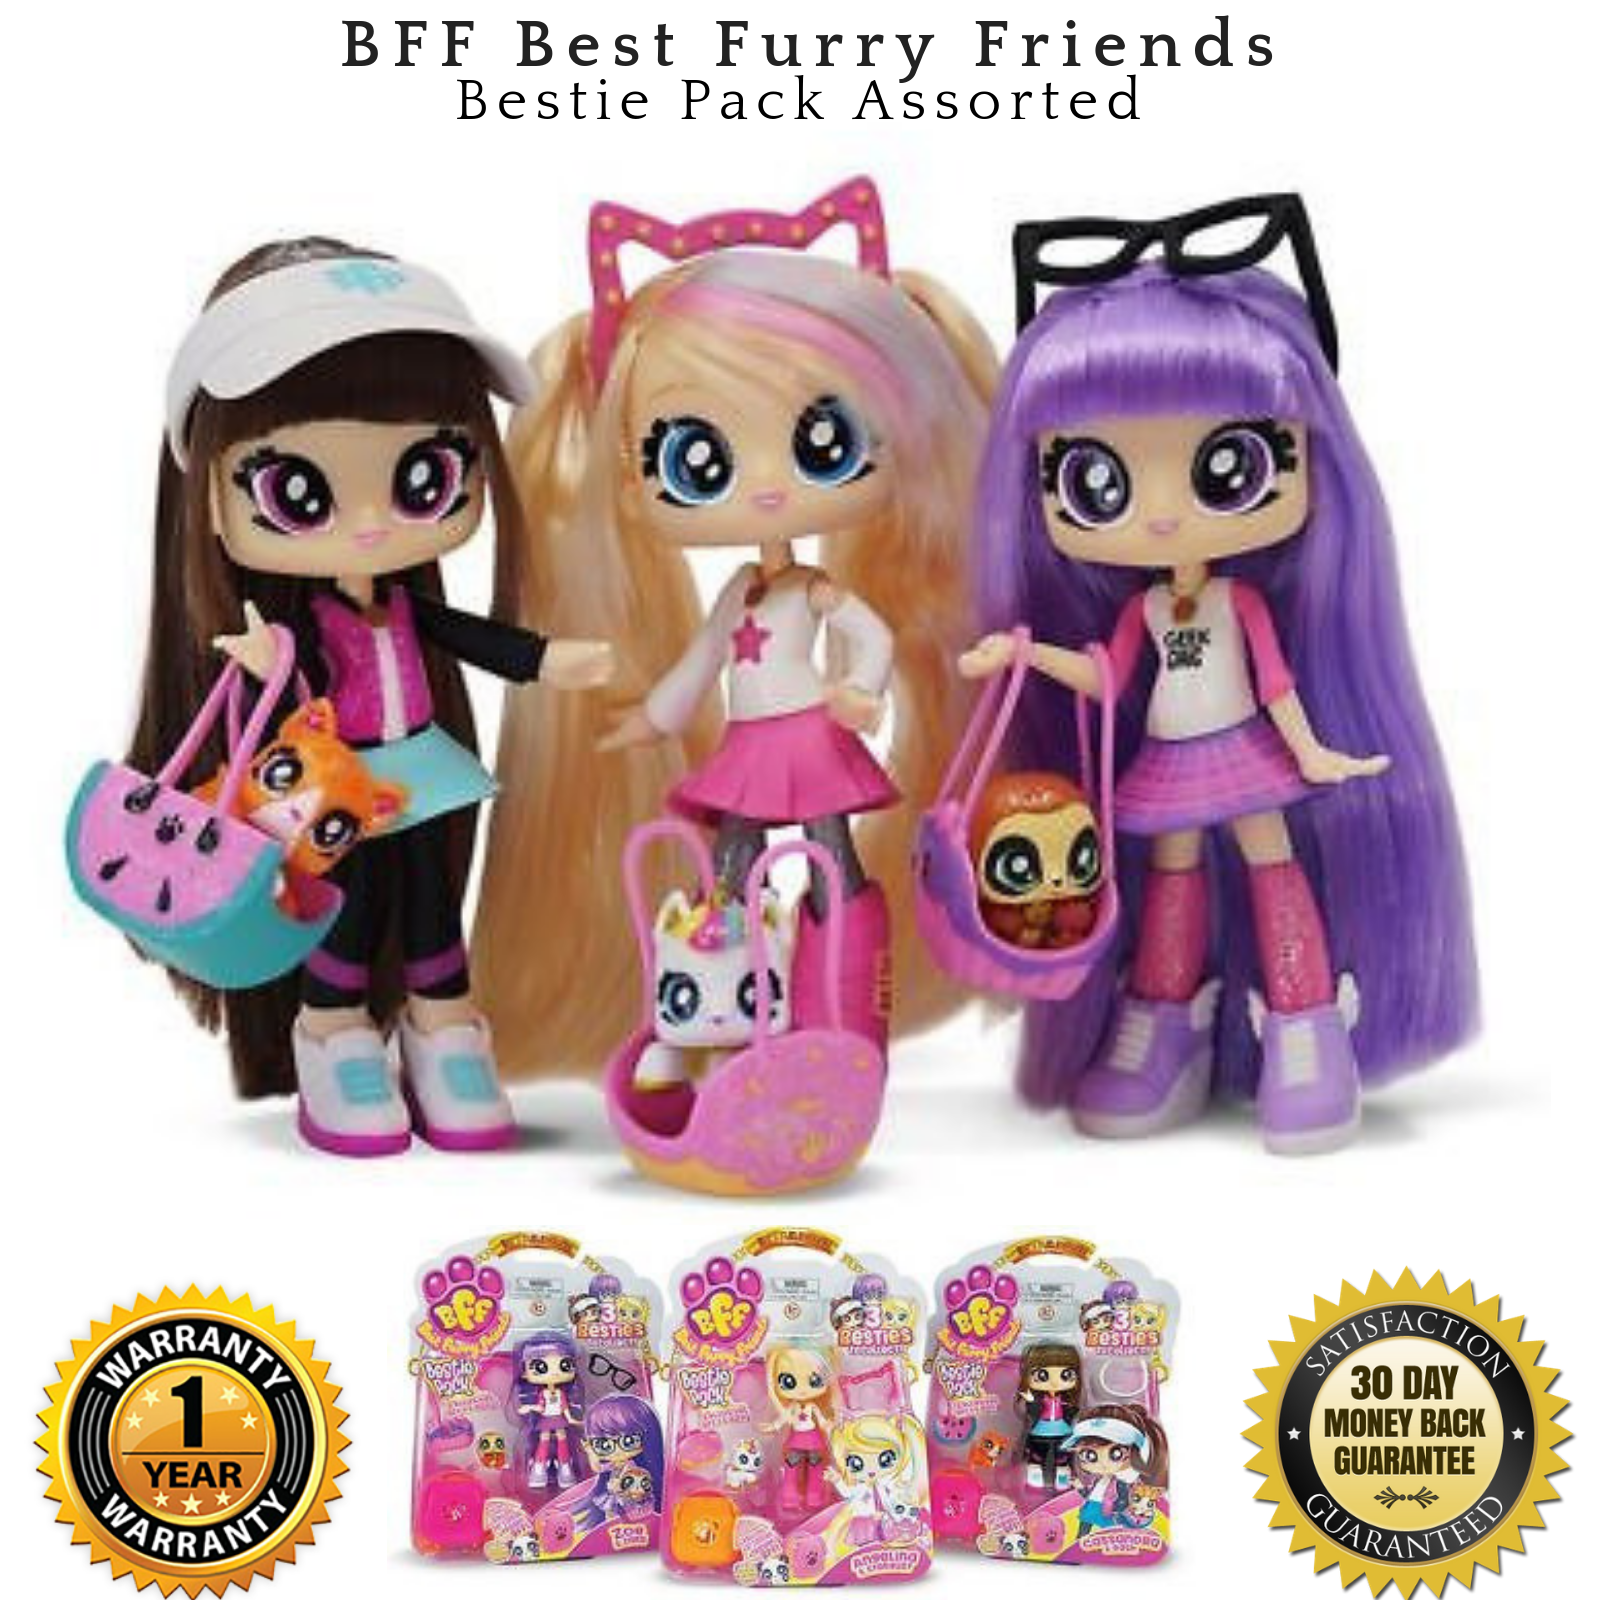 bff best furry friends plush with bag assorted